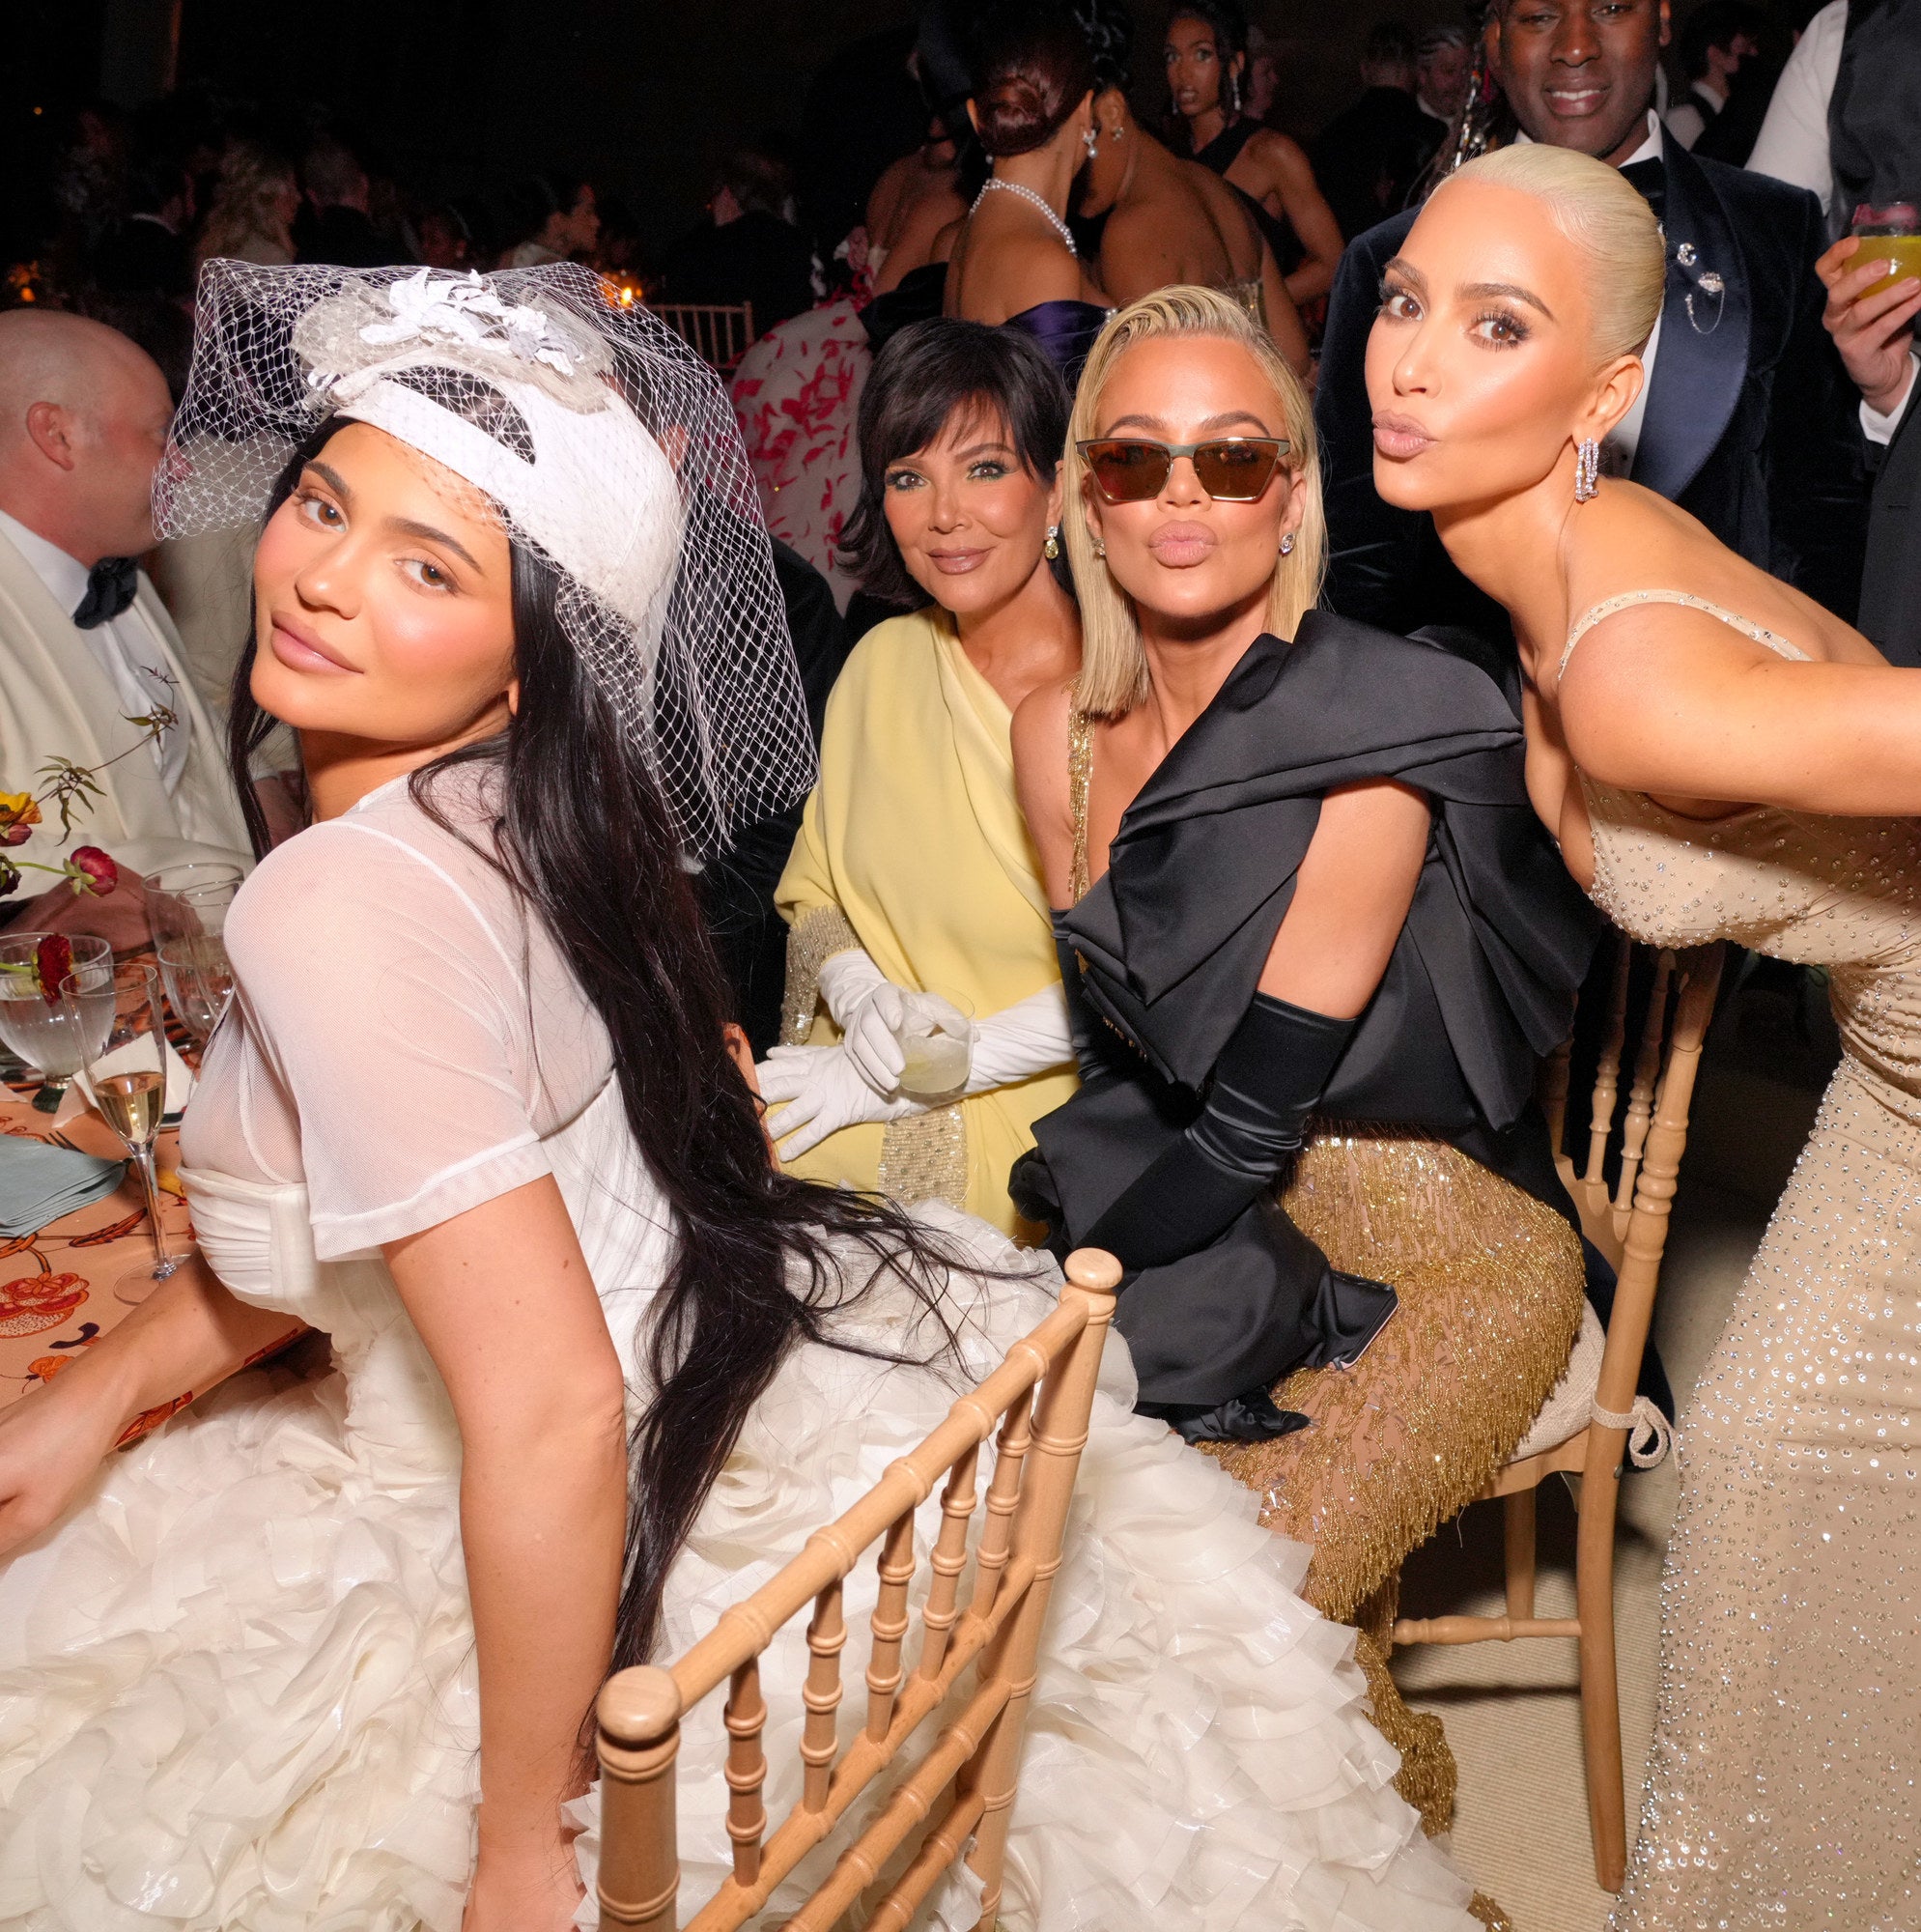 Kylie Jenner, Kris, Khloé, and Kim at a table